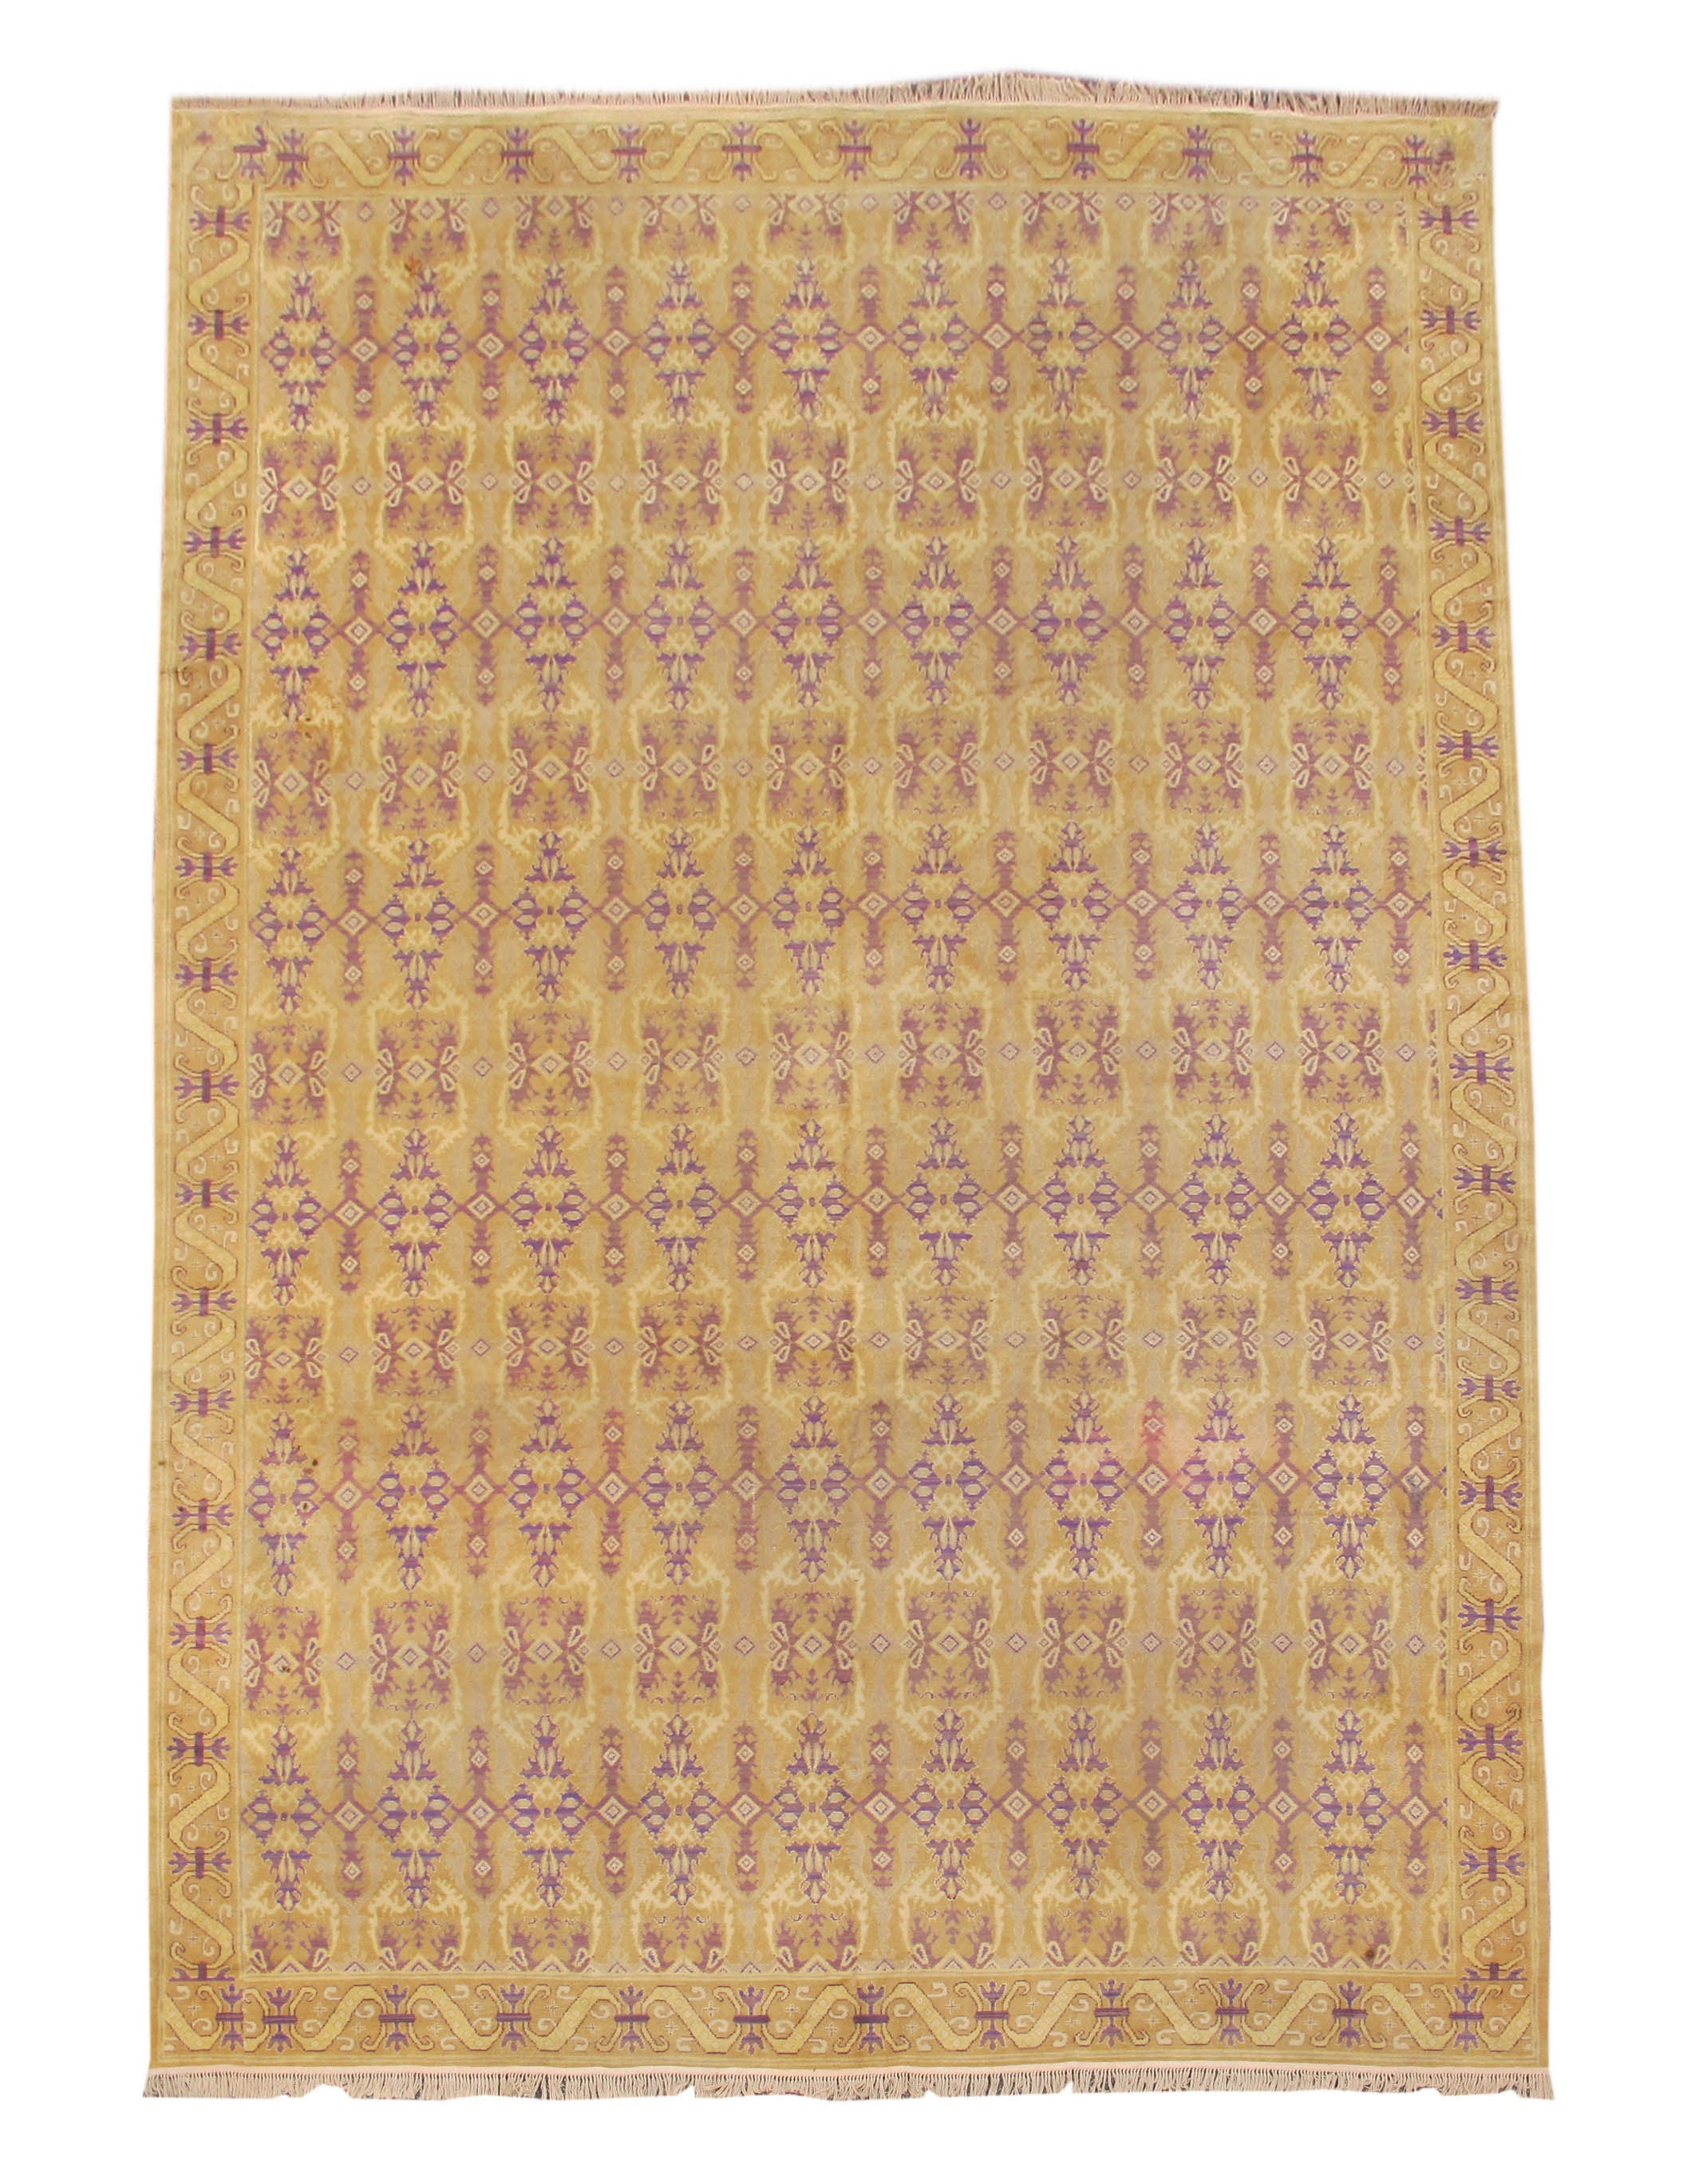 Early 20th Century Gold Colored Spanish Carpet with Voilet Patterns For Sale